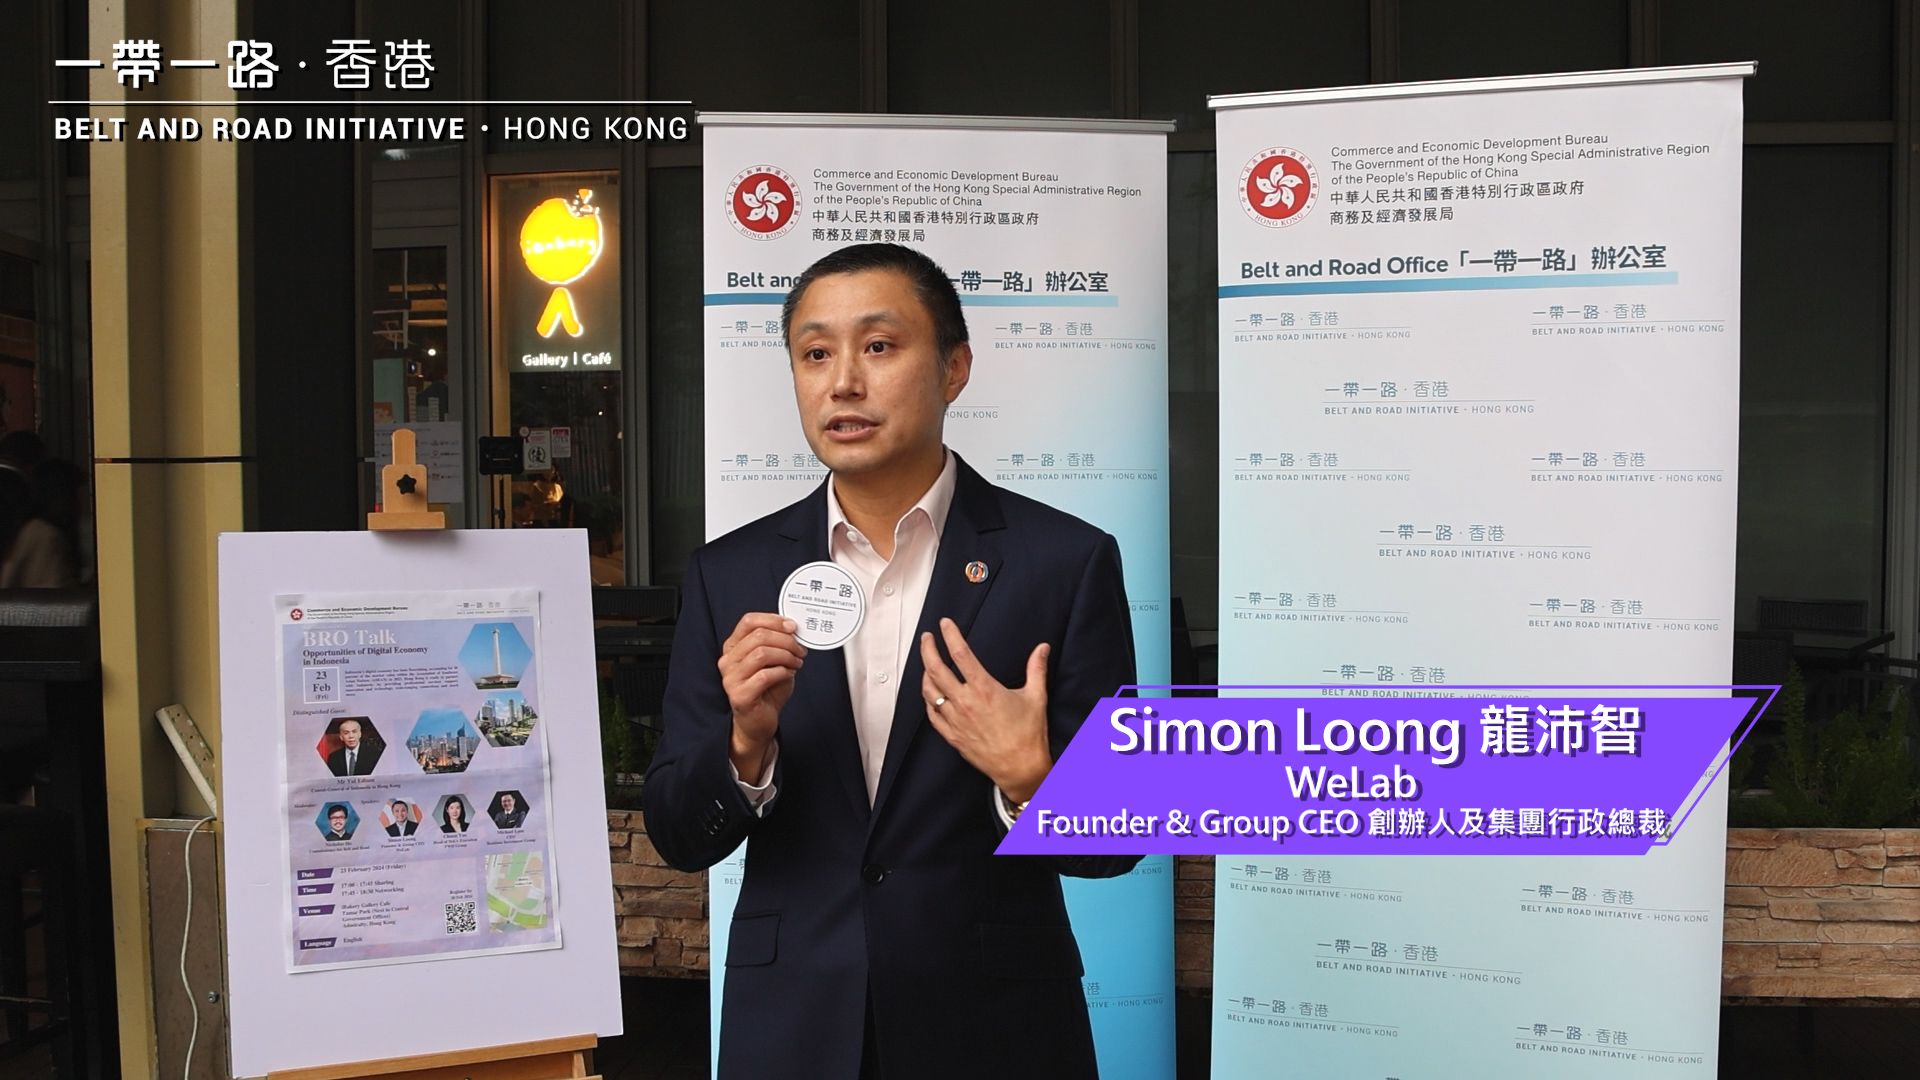 Interview with Mr Simon Loong